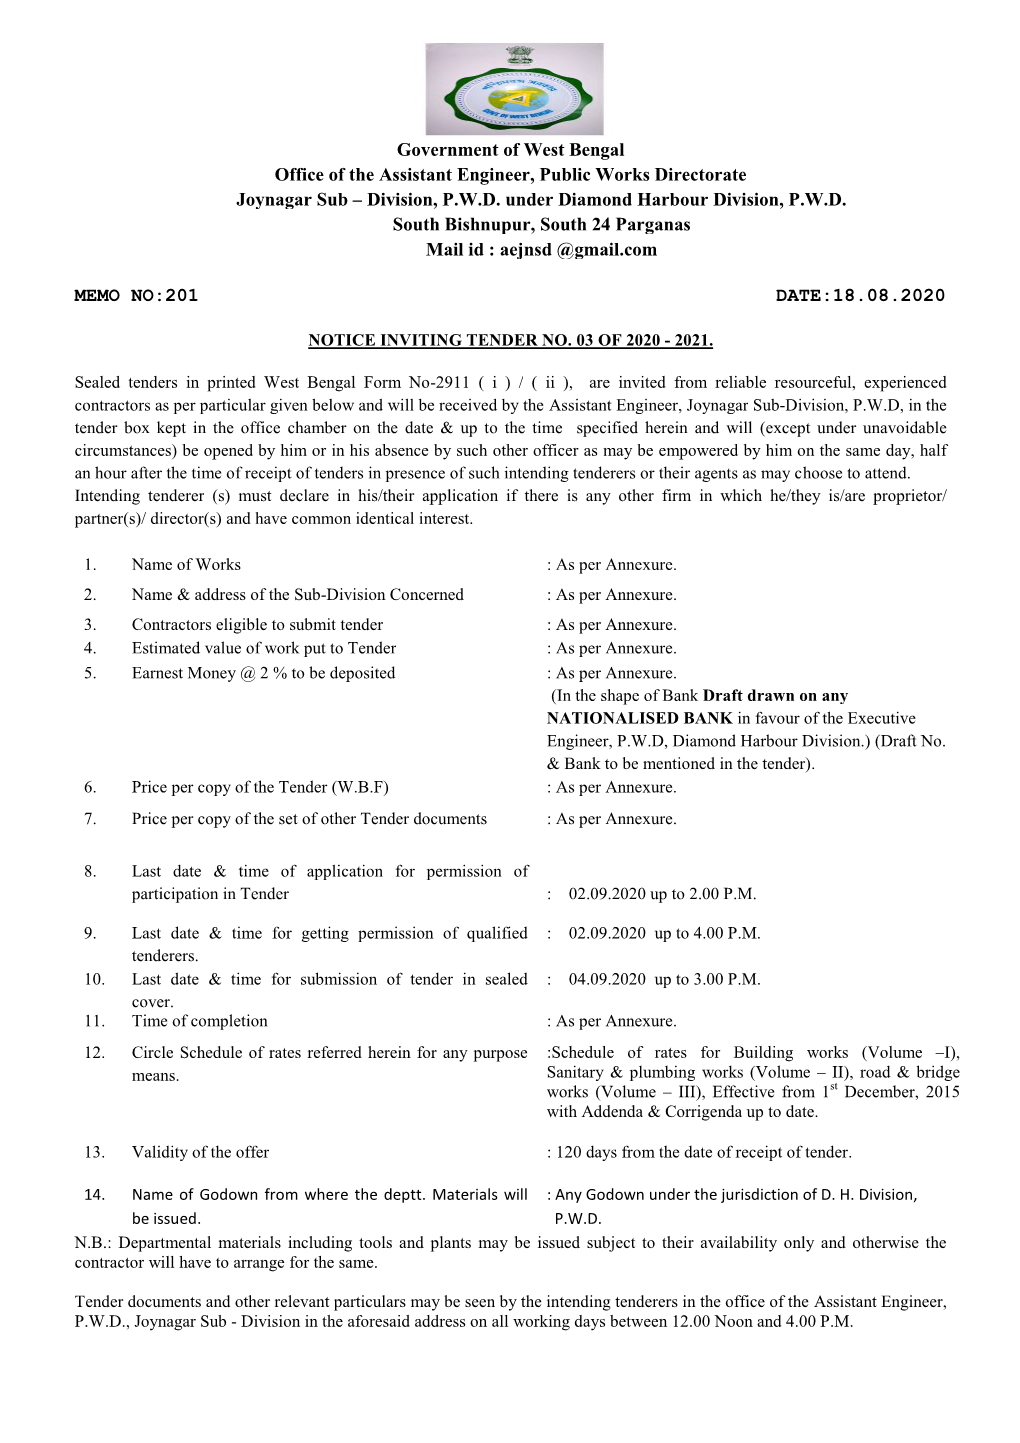 Government of West Bengal Office of the Assistant Engineer, Public Works Directorate Joynagar Sub – Division, P.W.D